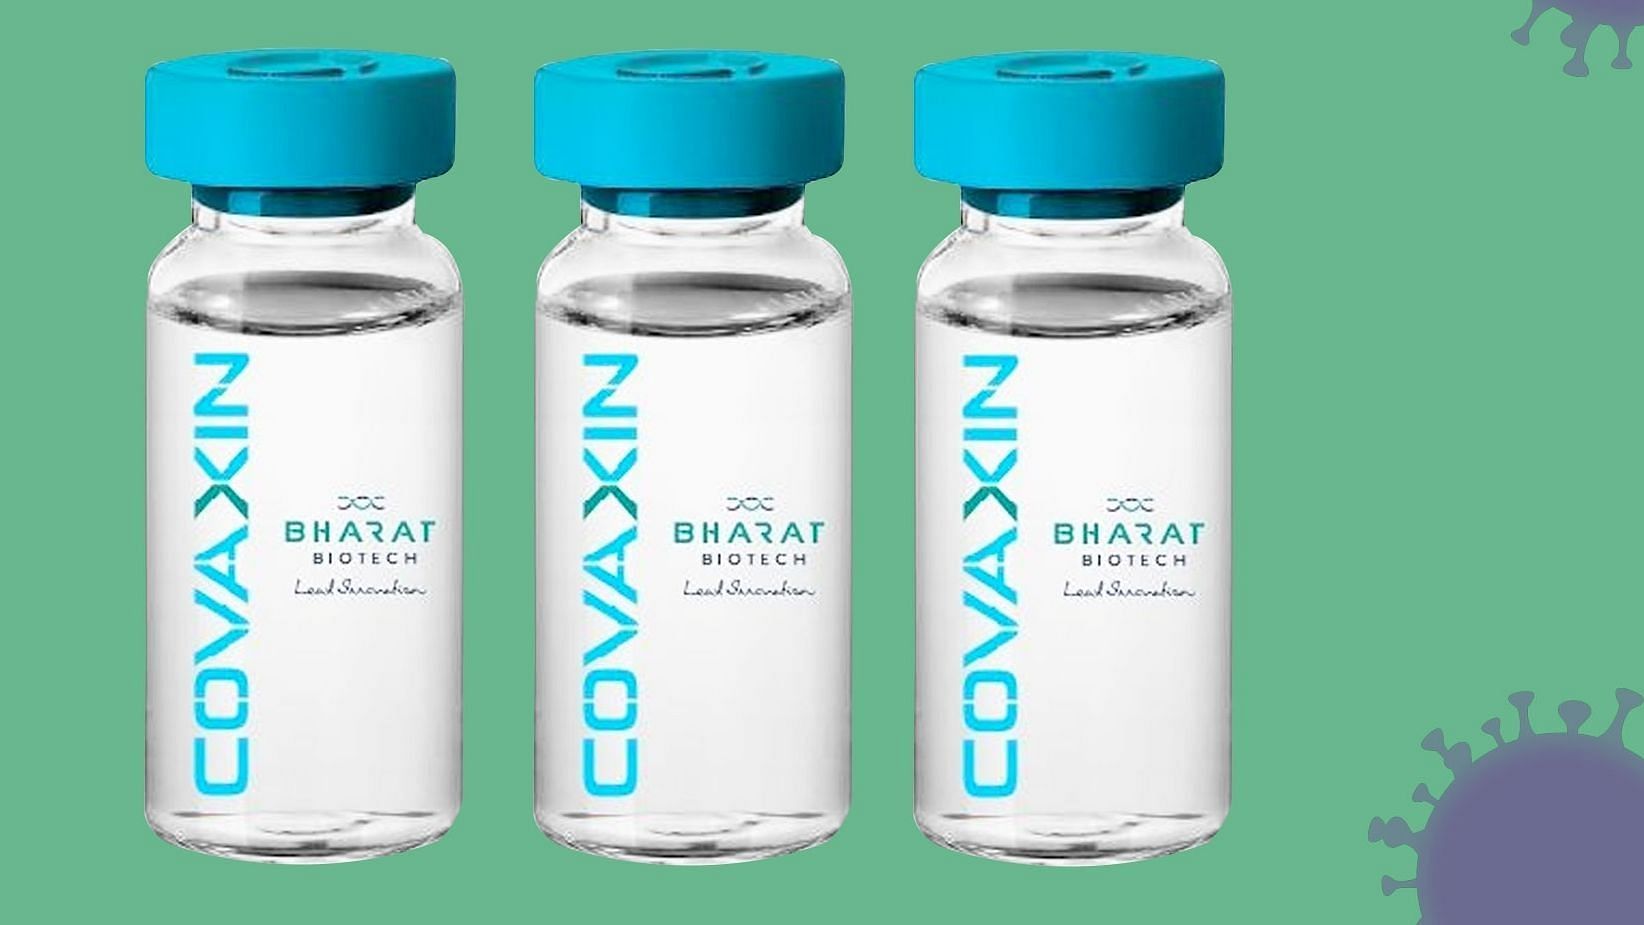 Bharat Biotech concludes recruitment for Covaxin’s Phase 3 study.